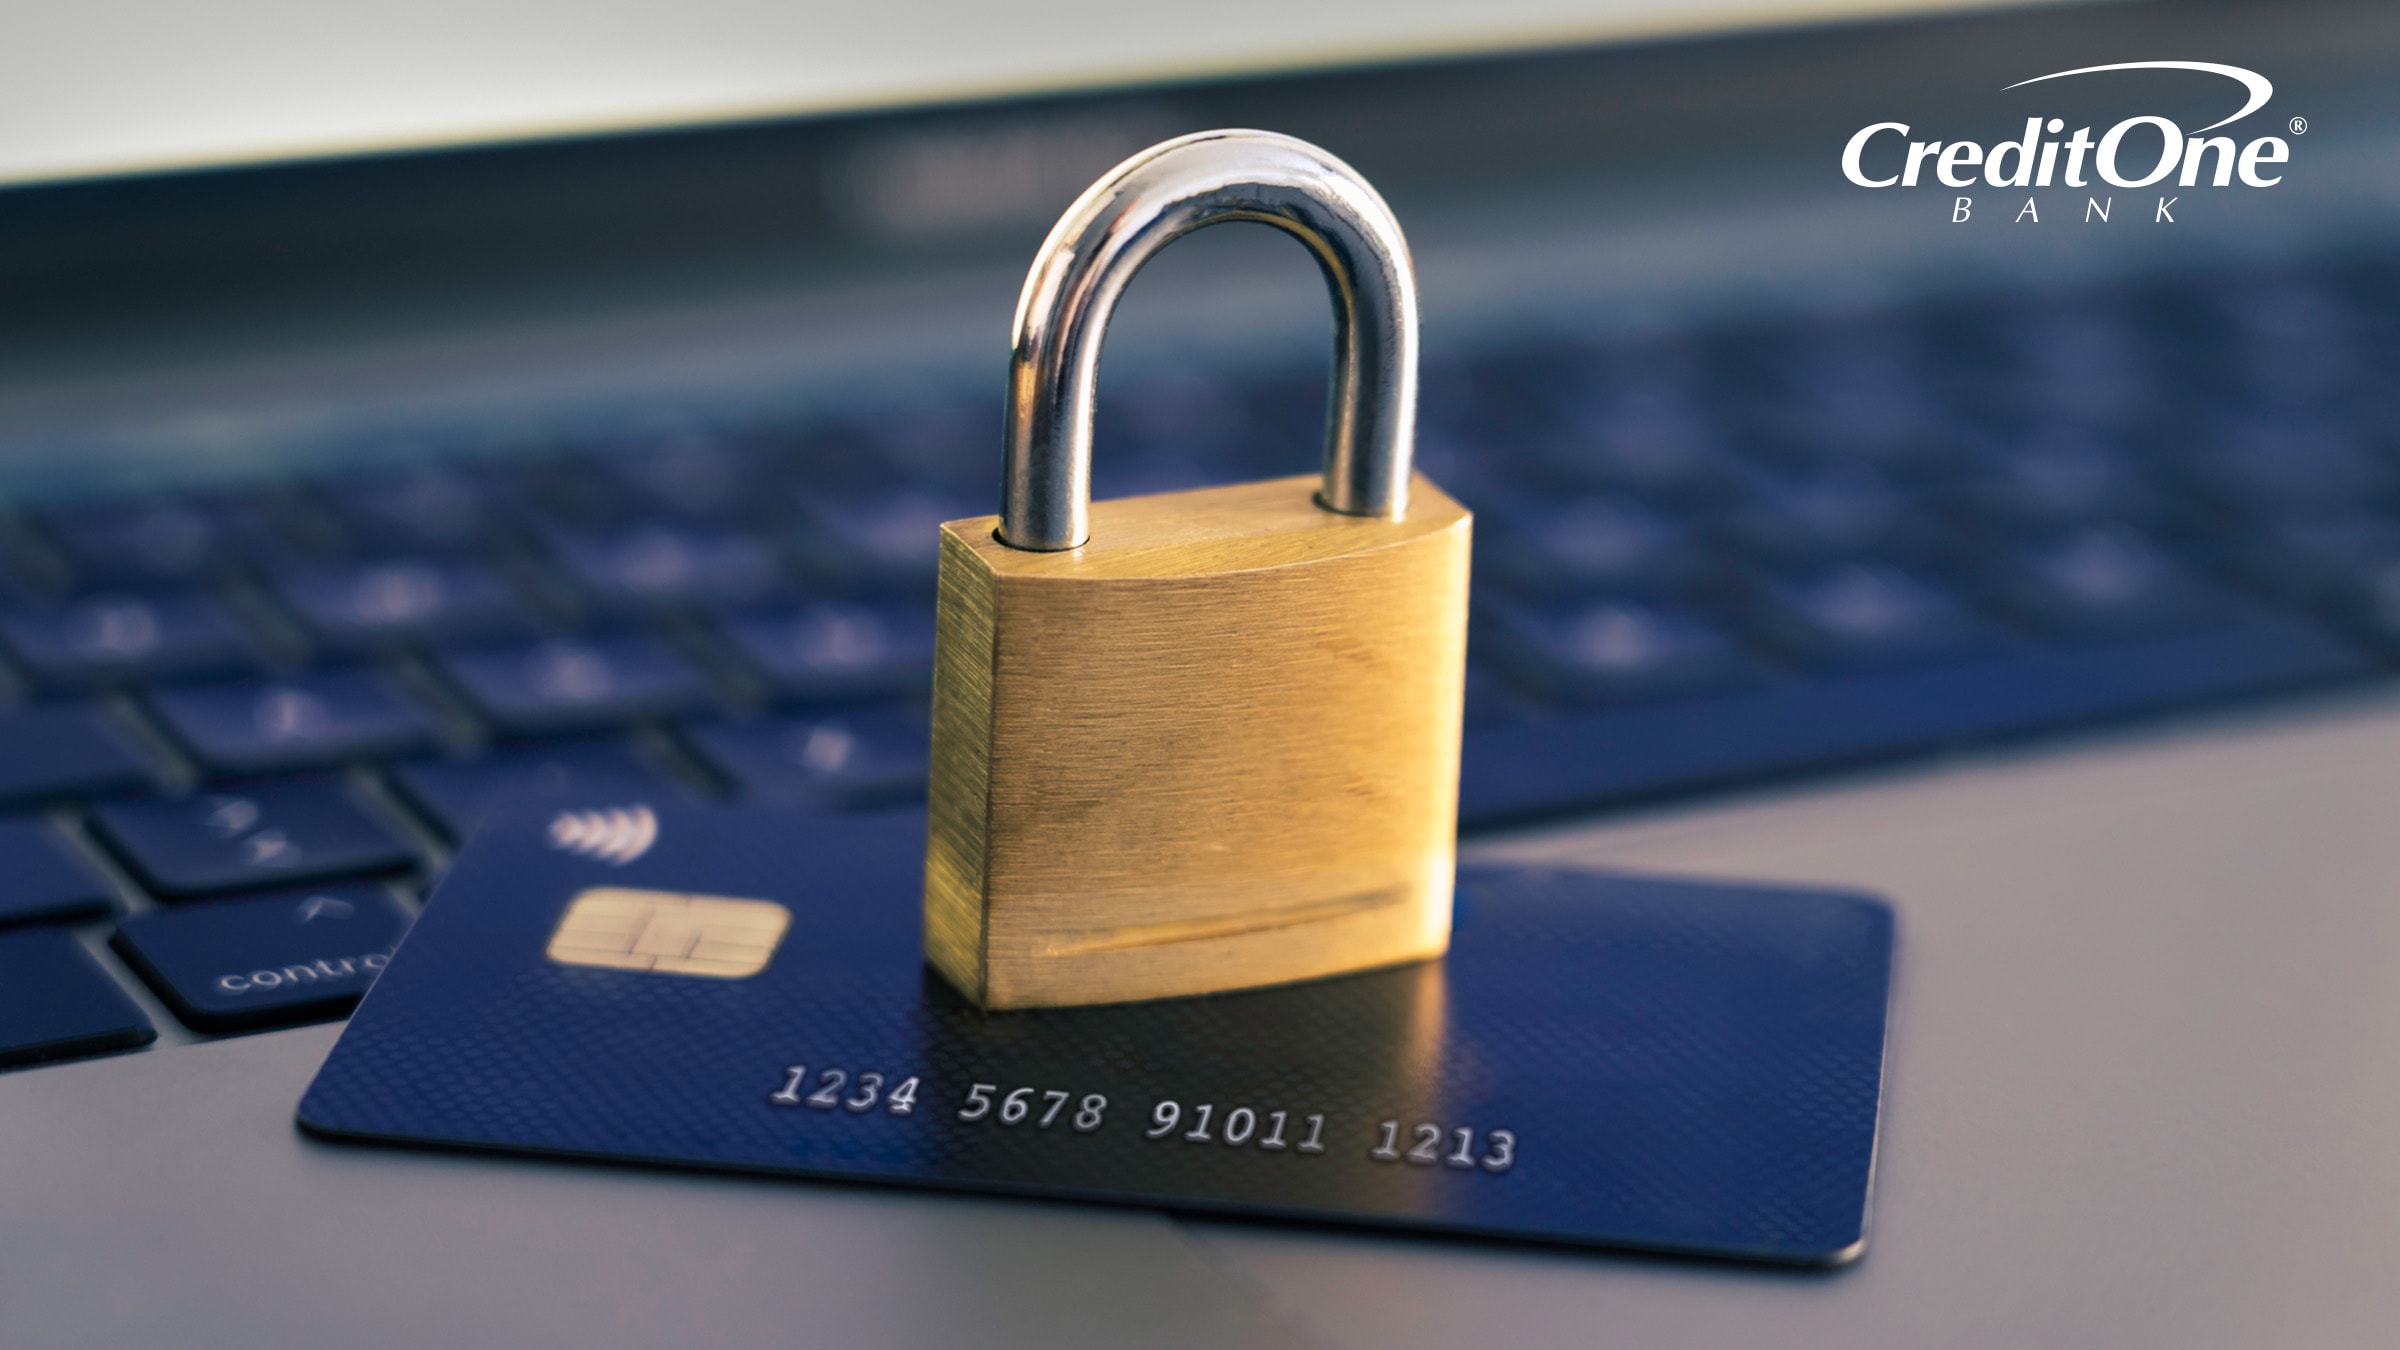 A lock rests on top of a credit card, signifying a secured card.